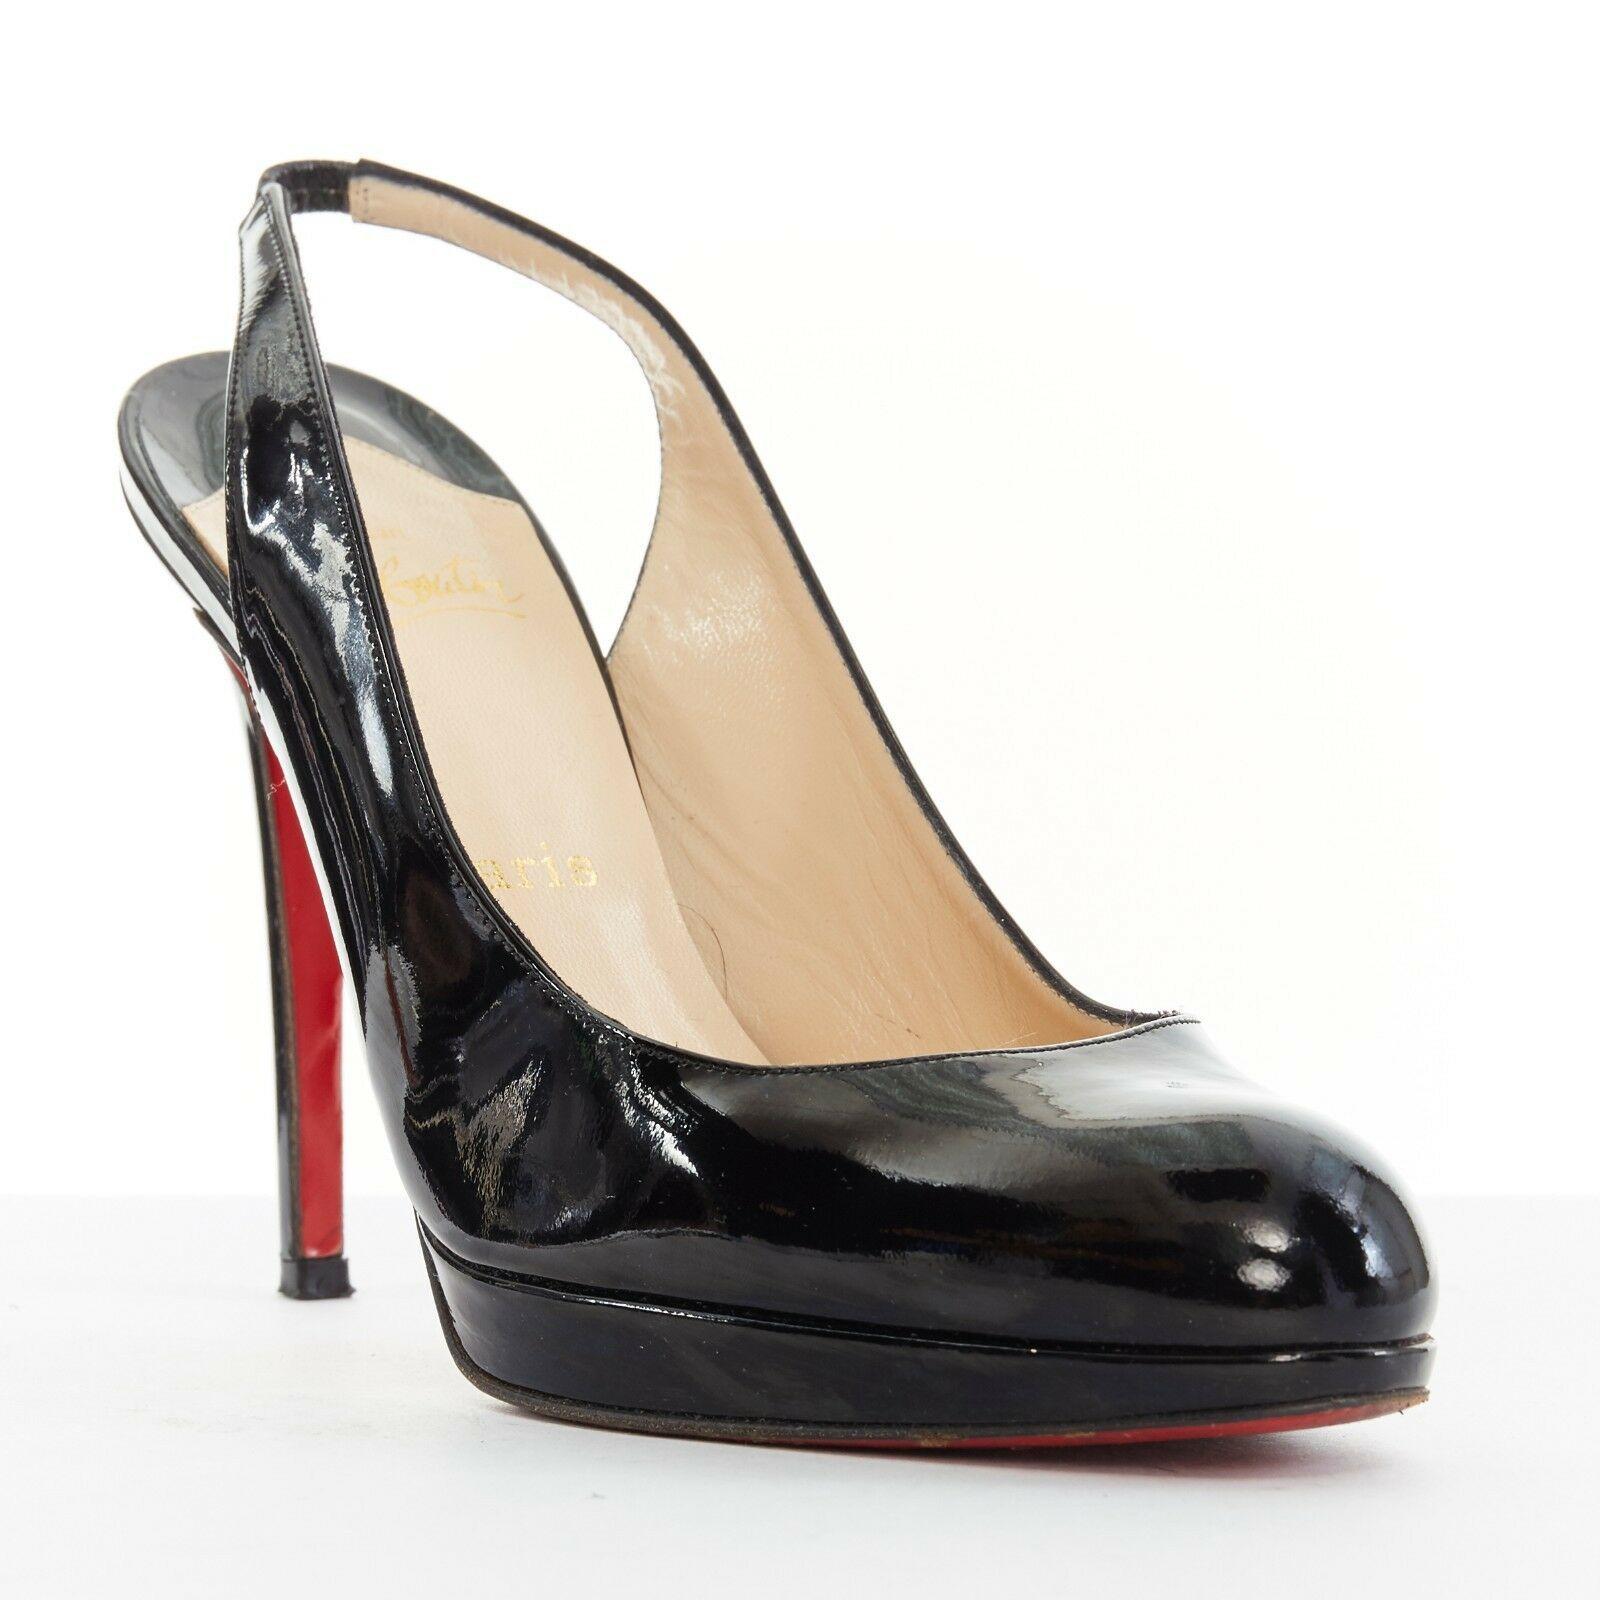 CHRISTIAN LOUBOUTIN Horatio 120 black patent round platform sling heel EU39 US9

CHRISTIAN LOUBOUTIN
Horatio 120. Black patent leather. Rounded almond toe. Platform front. Slim heel. Elasticated slingback. Tan leather lining. Lighly padded insole.